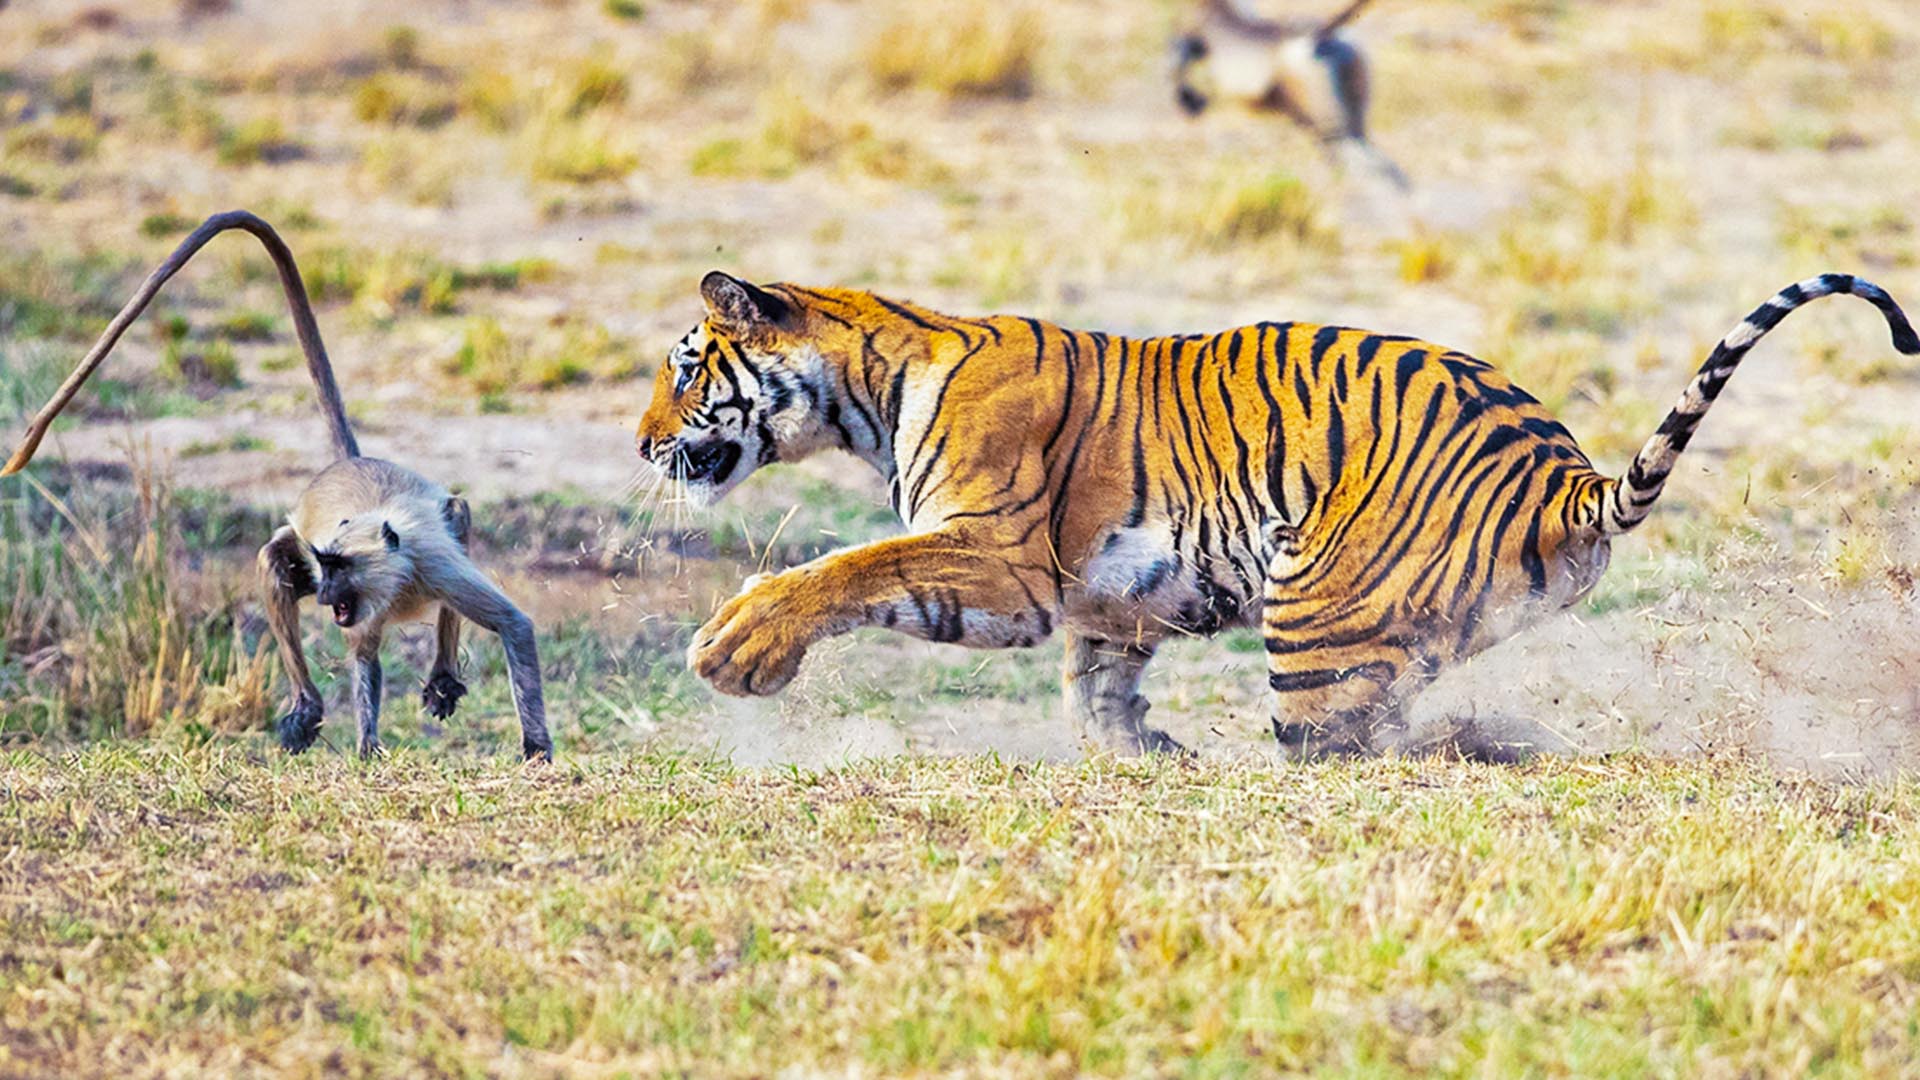 Tiger Stalks and Attacks Unsuspecting Monkey